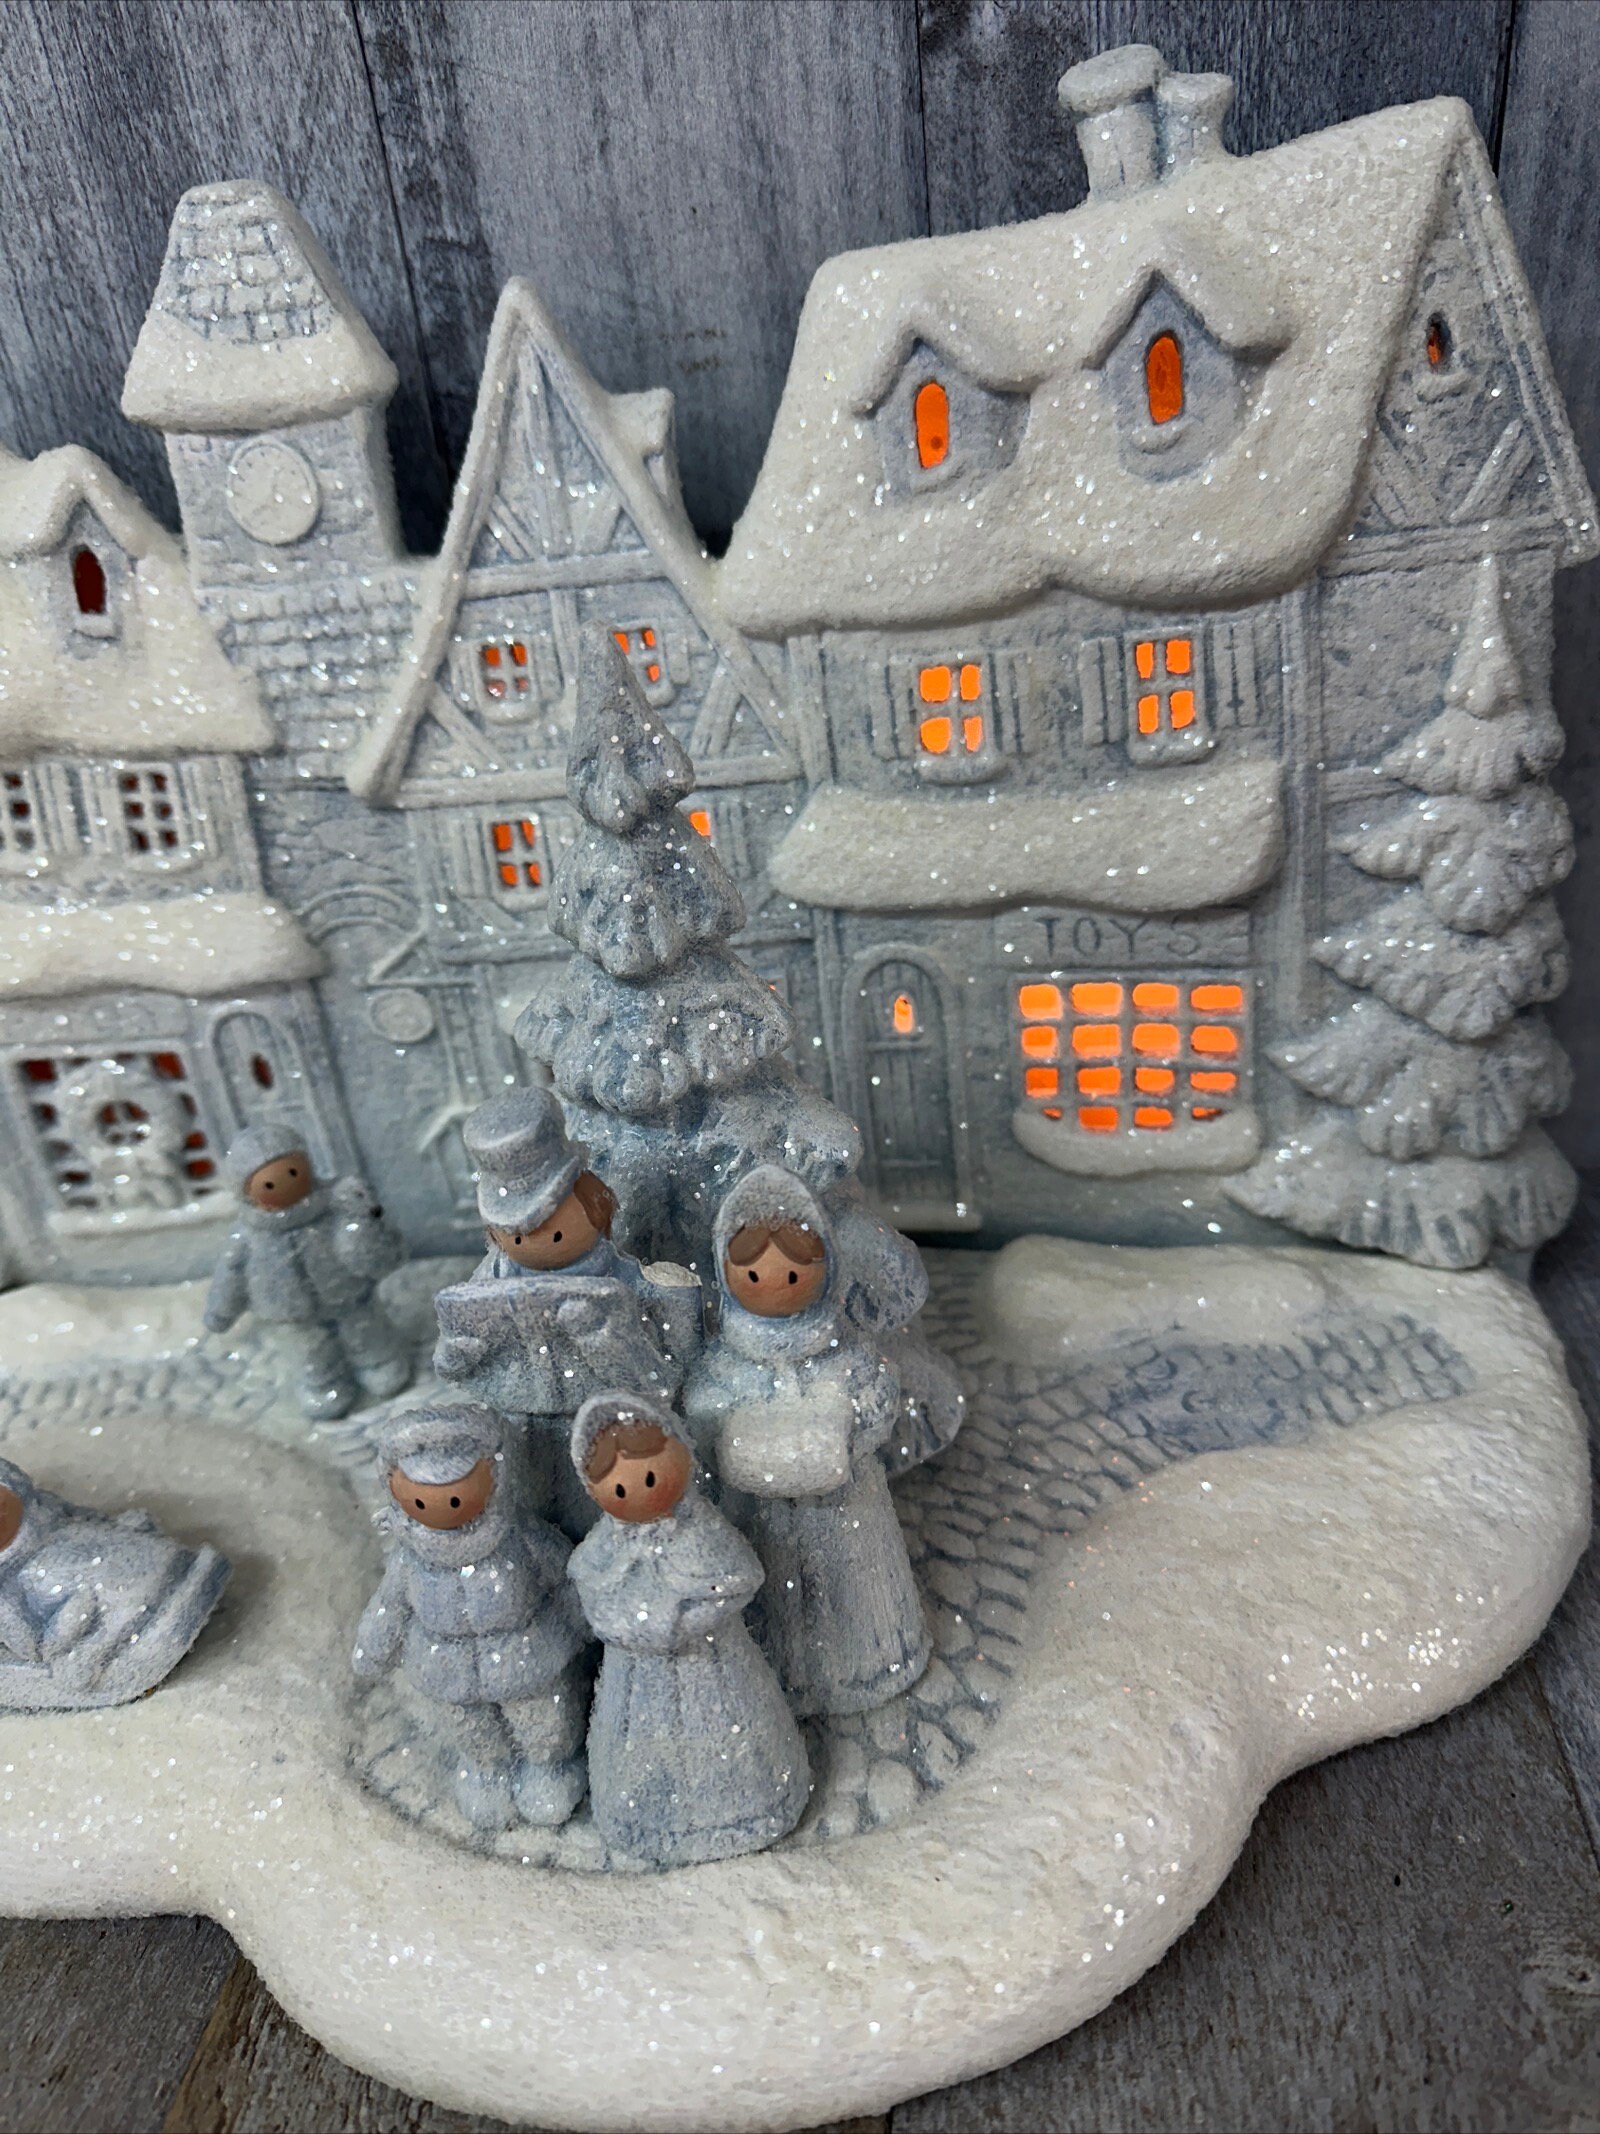 Vintage Blue Ceramic Bisque Village with Snow and Glitter Roofs and Trees